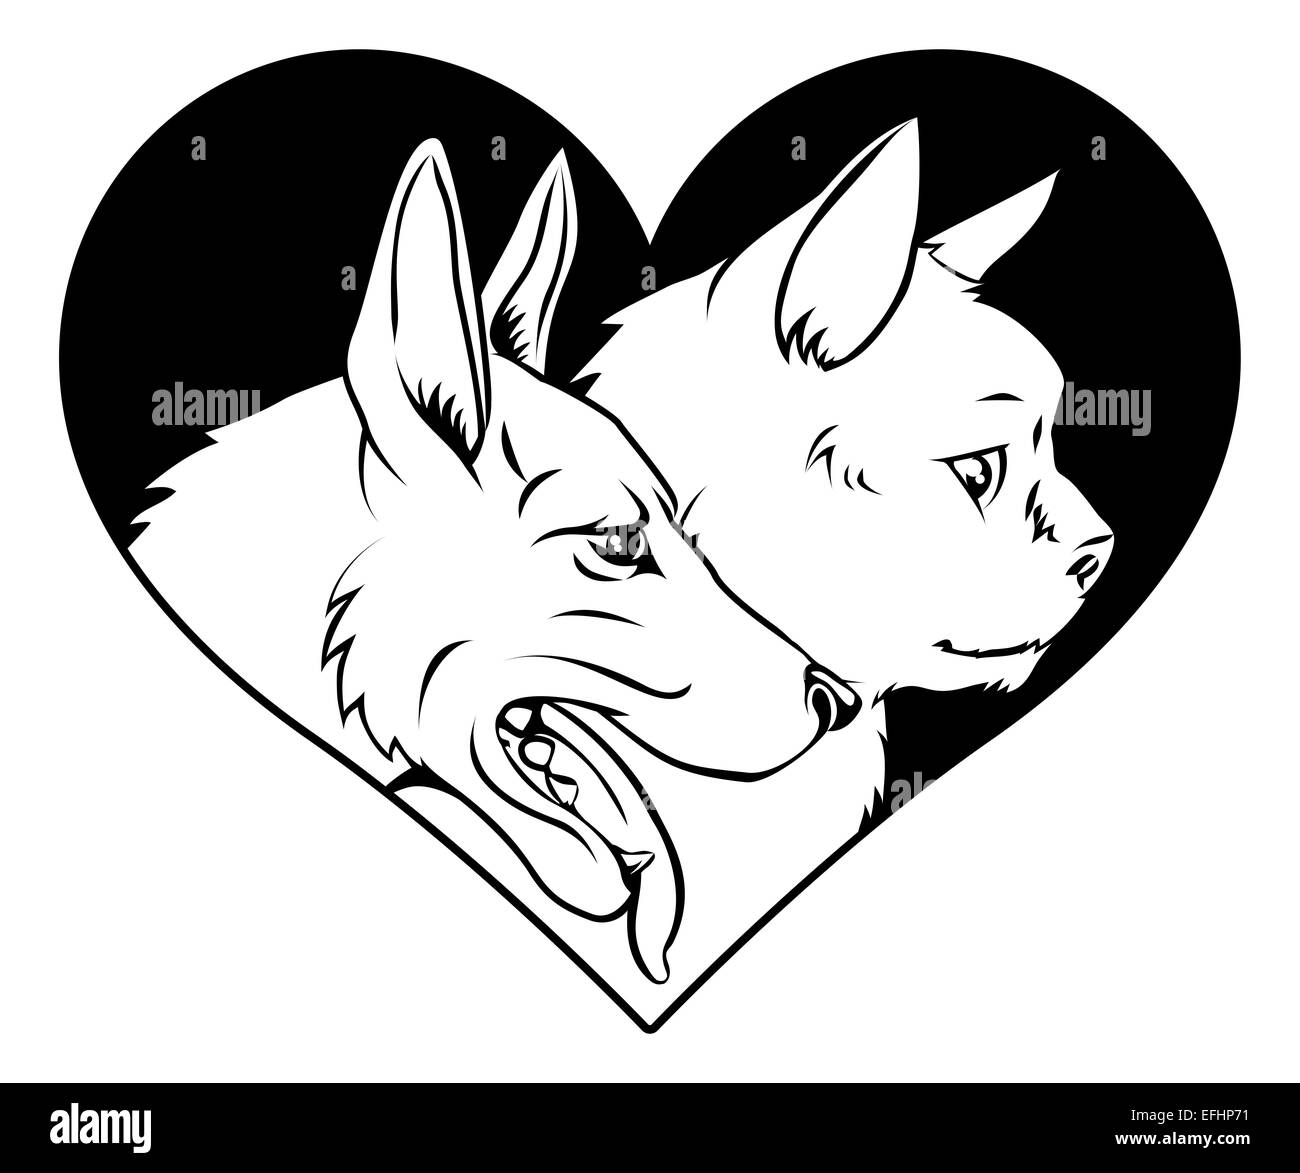 An abstract illustration of pet cat and dog in a heart symbol icon concept design Stock Photo